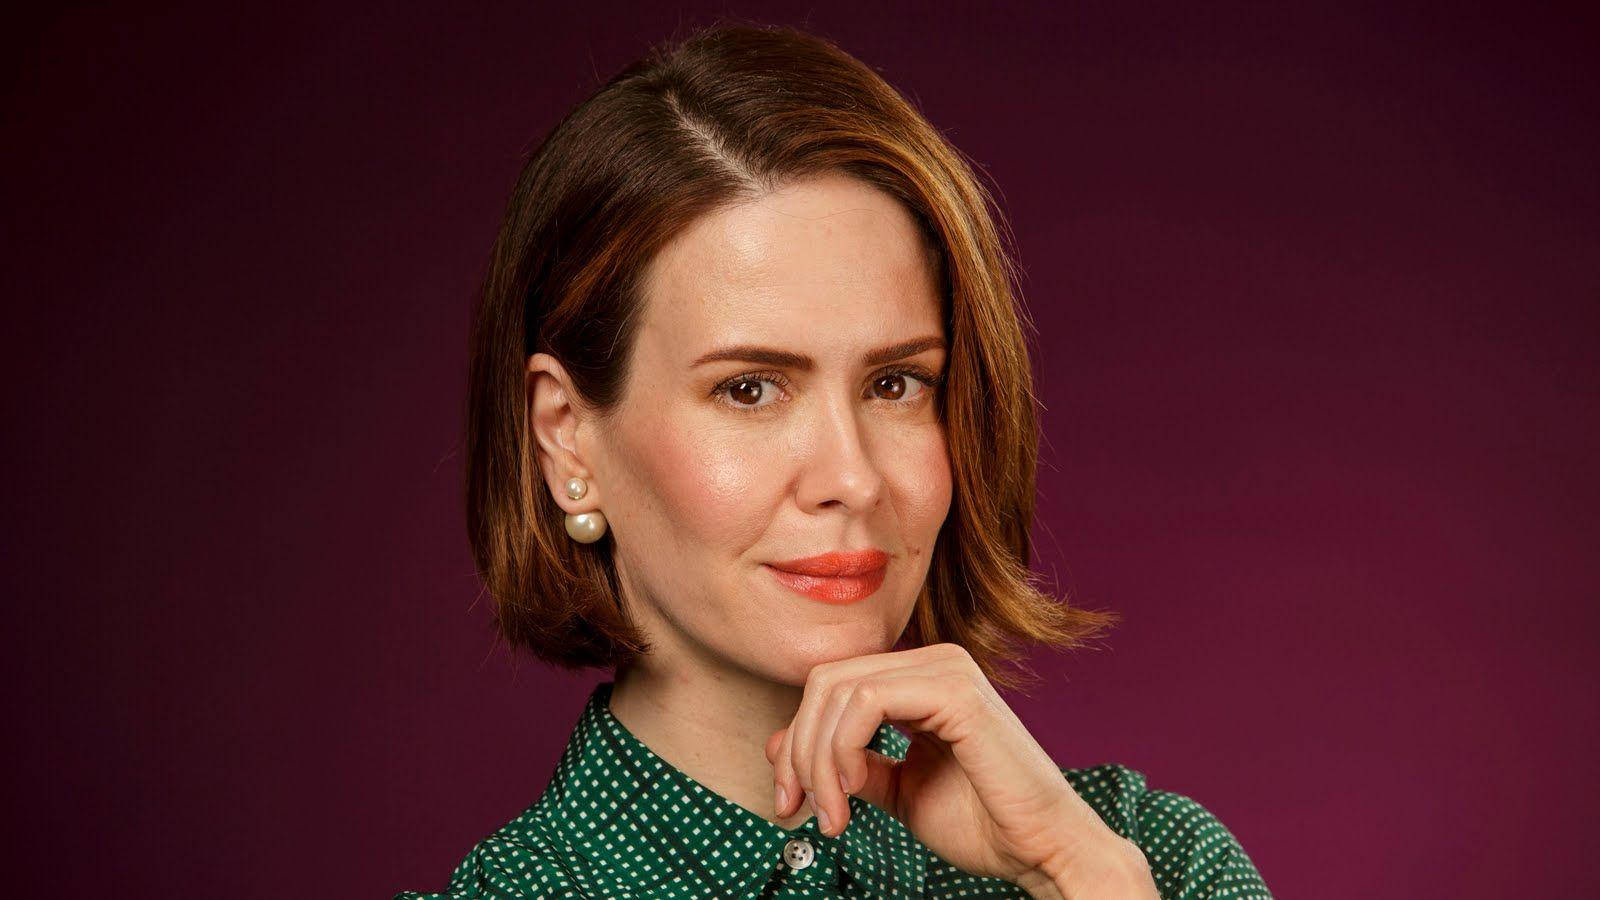 Sarah Paulson Portrait With Maroon Background Wallpaper